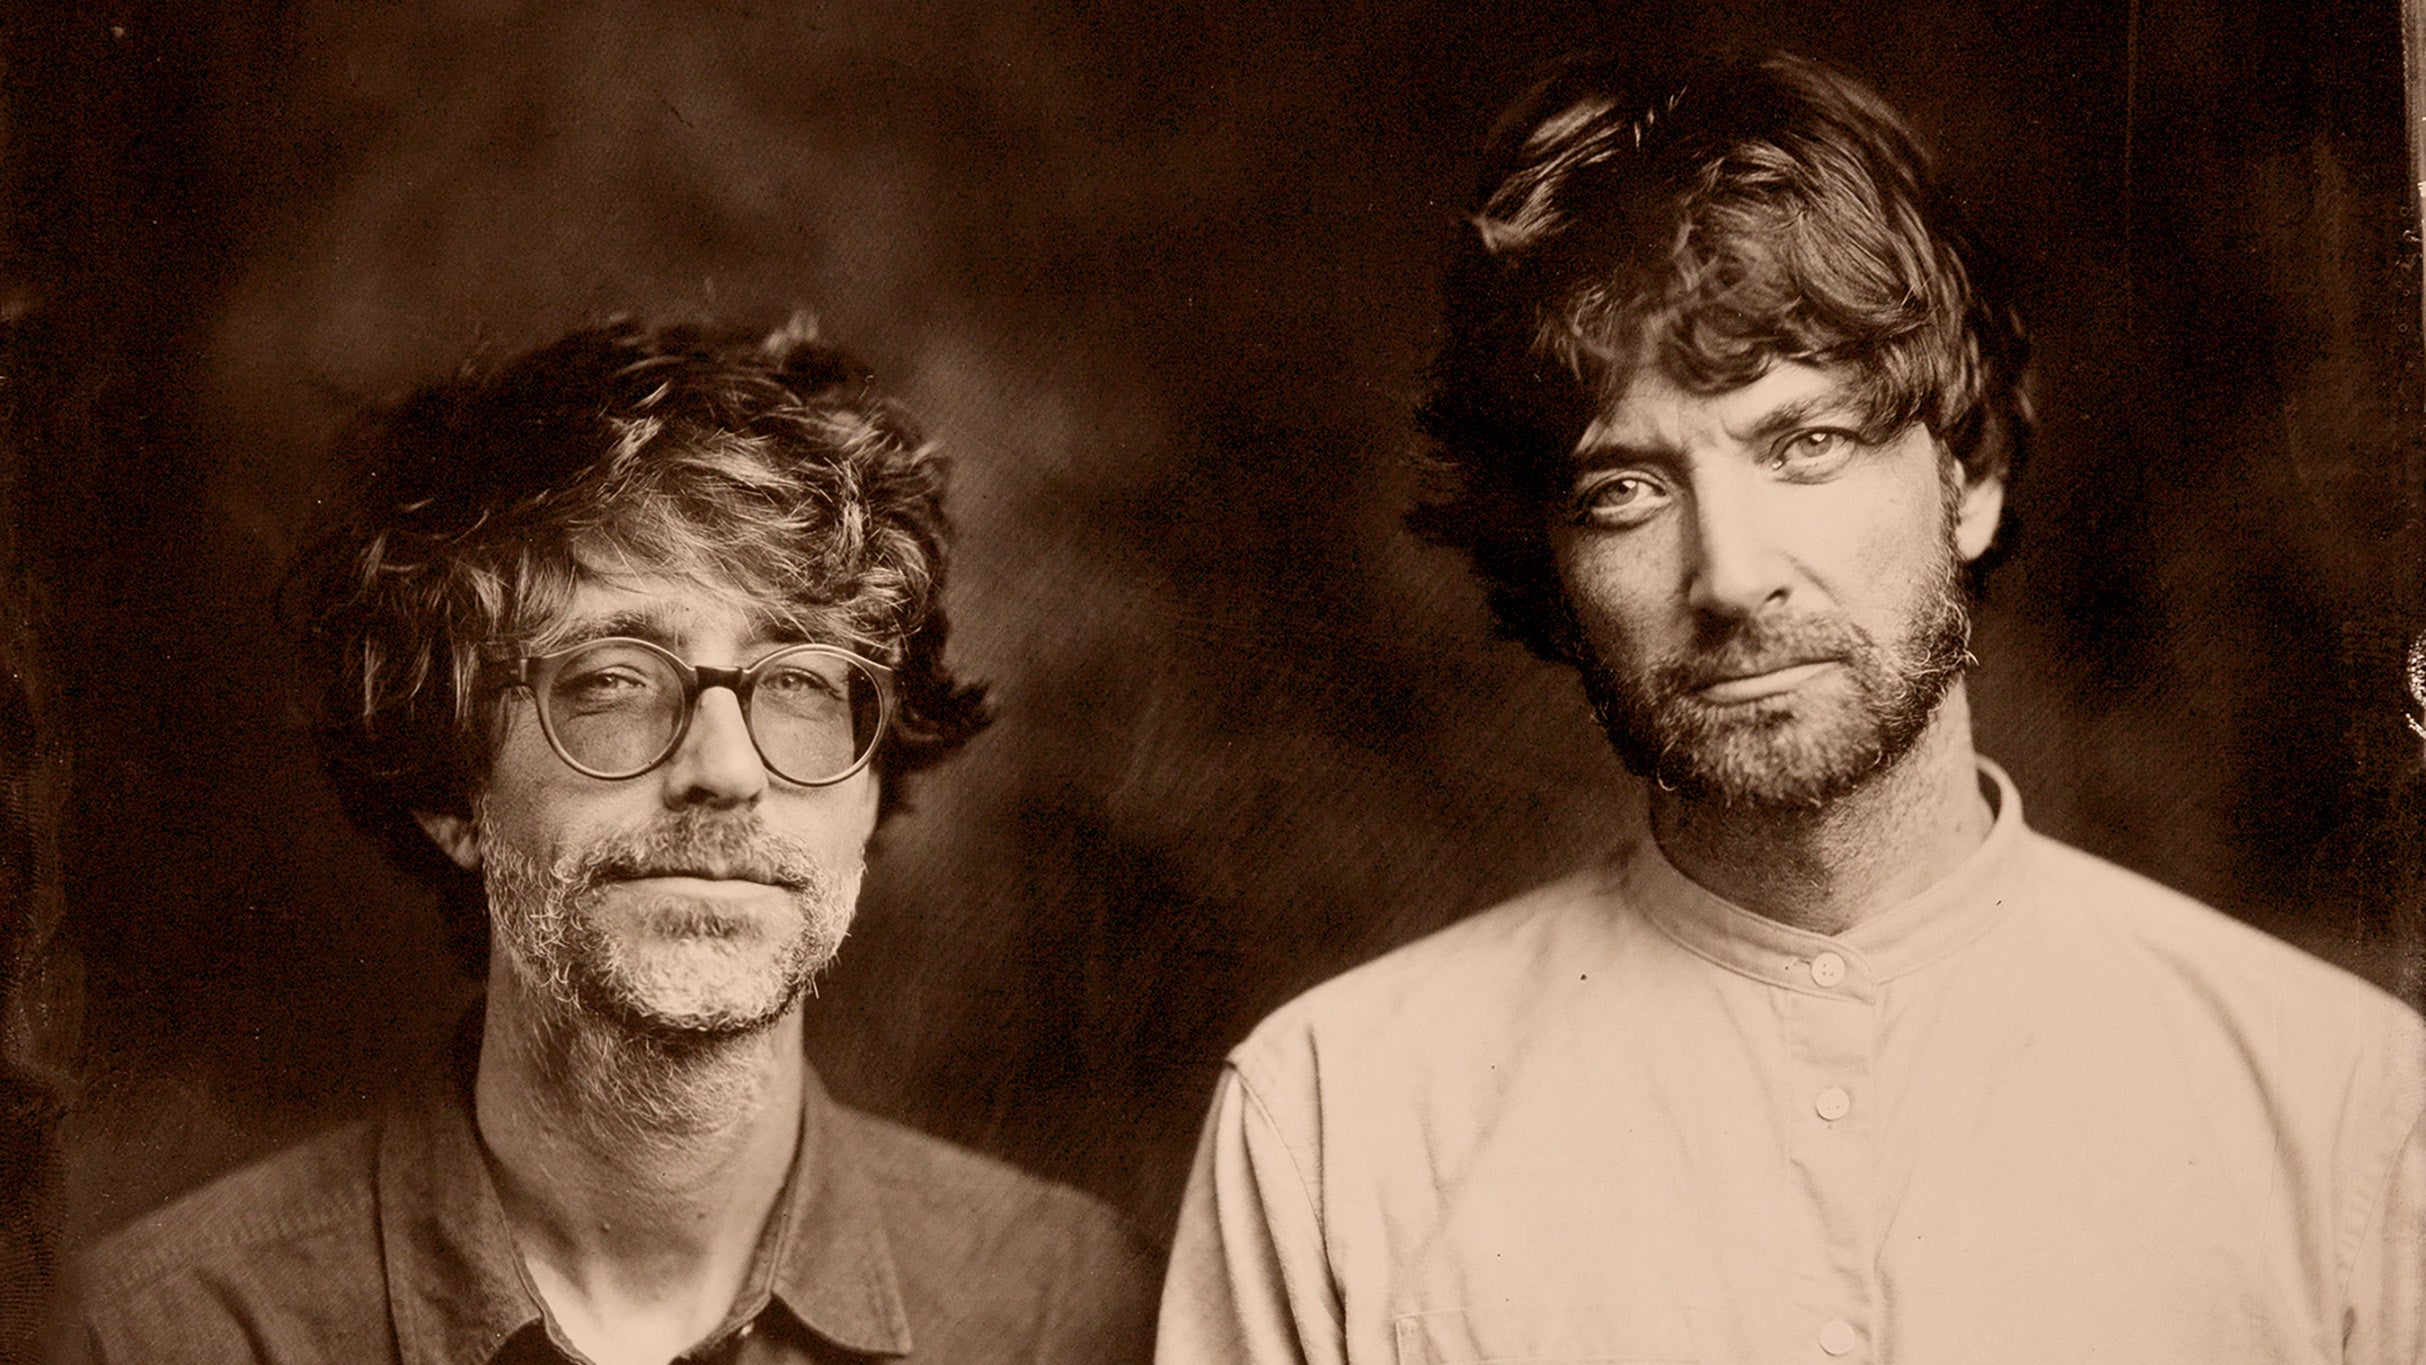 An Evening With Kings of Convenience free pre-sale password